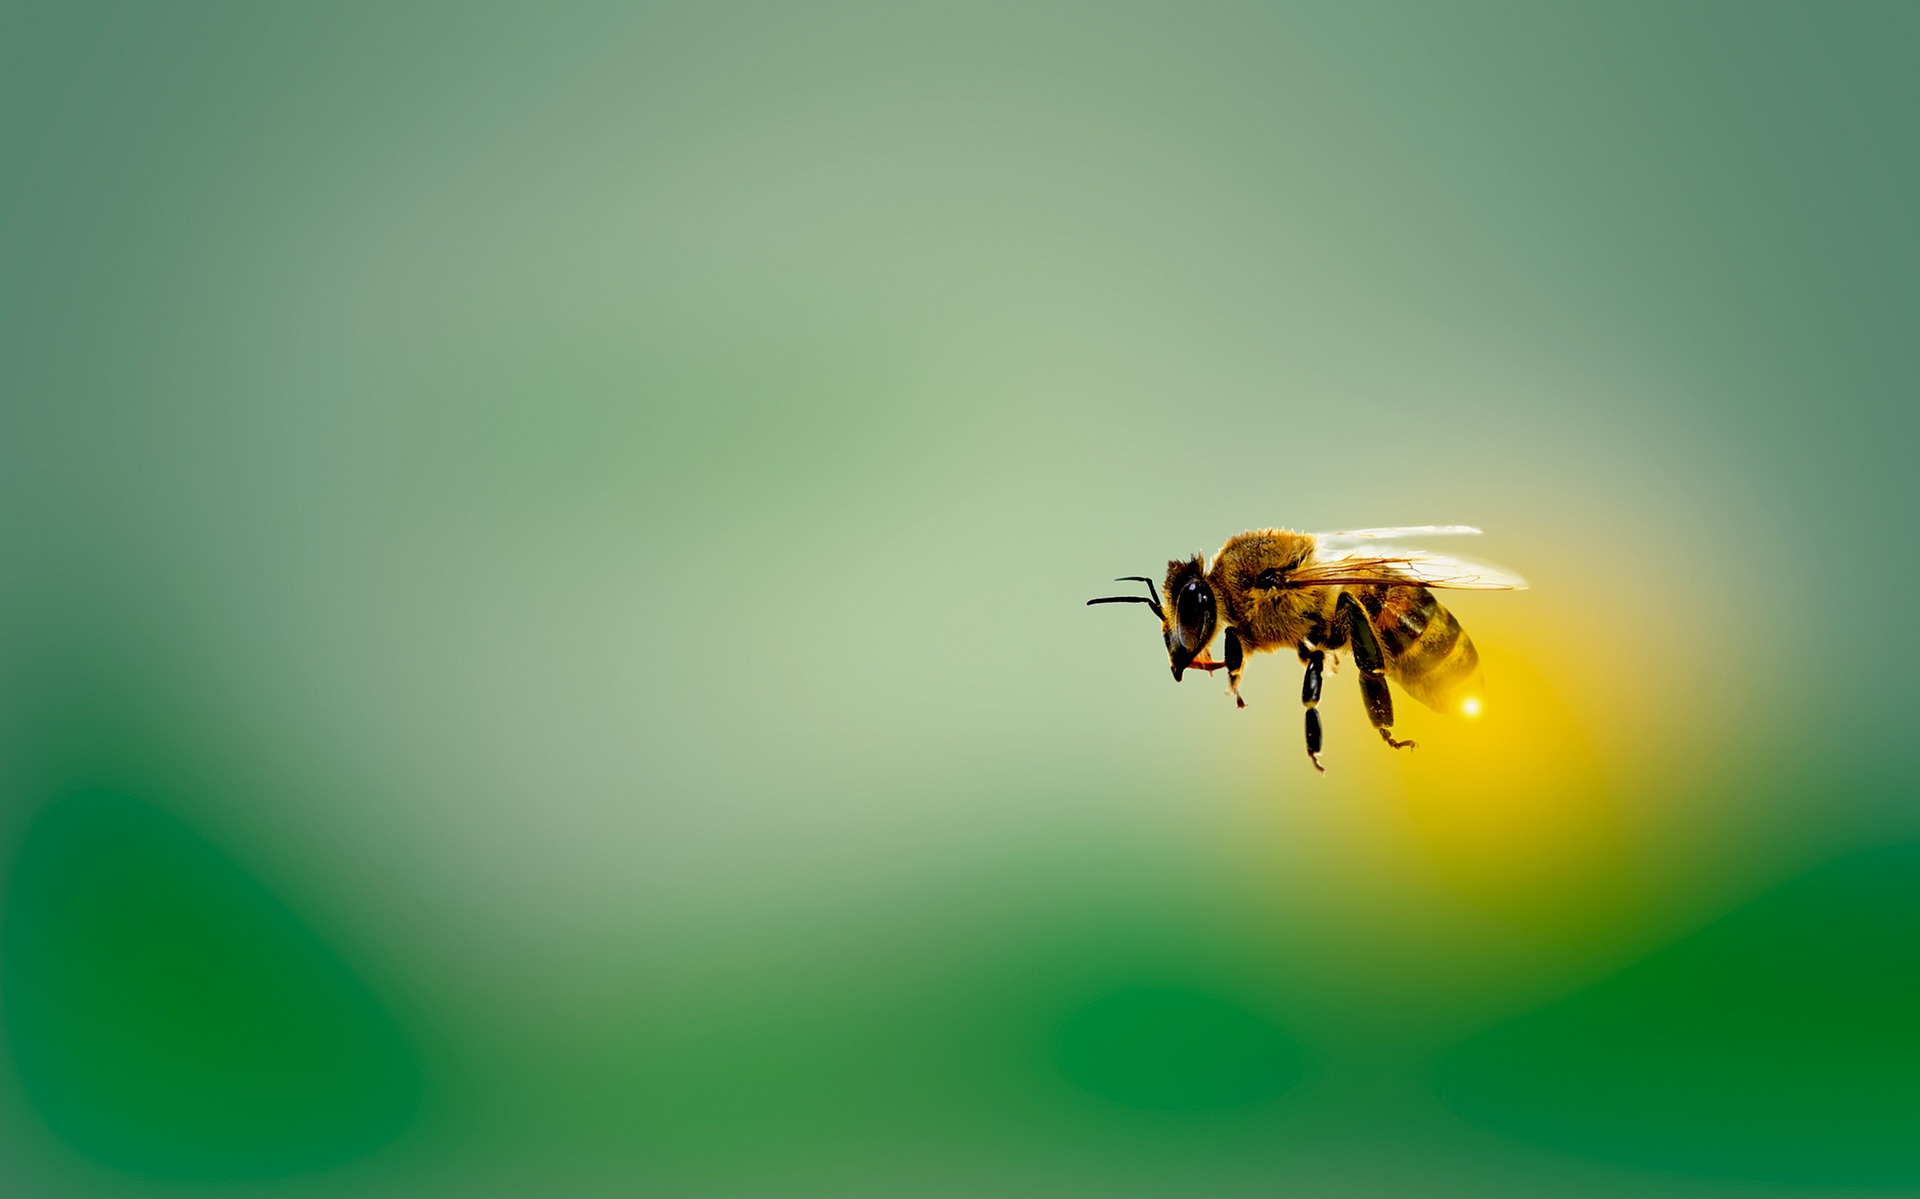 Bees – Parasites, Pesticides, and Climate Change